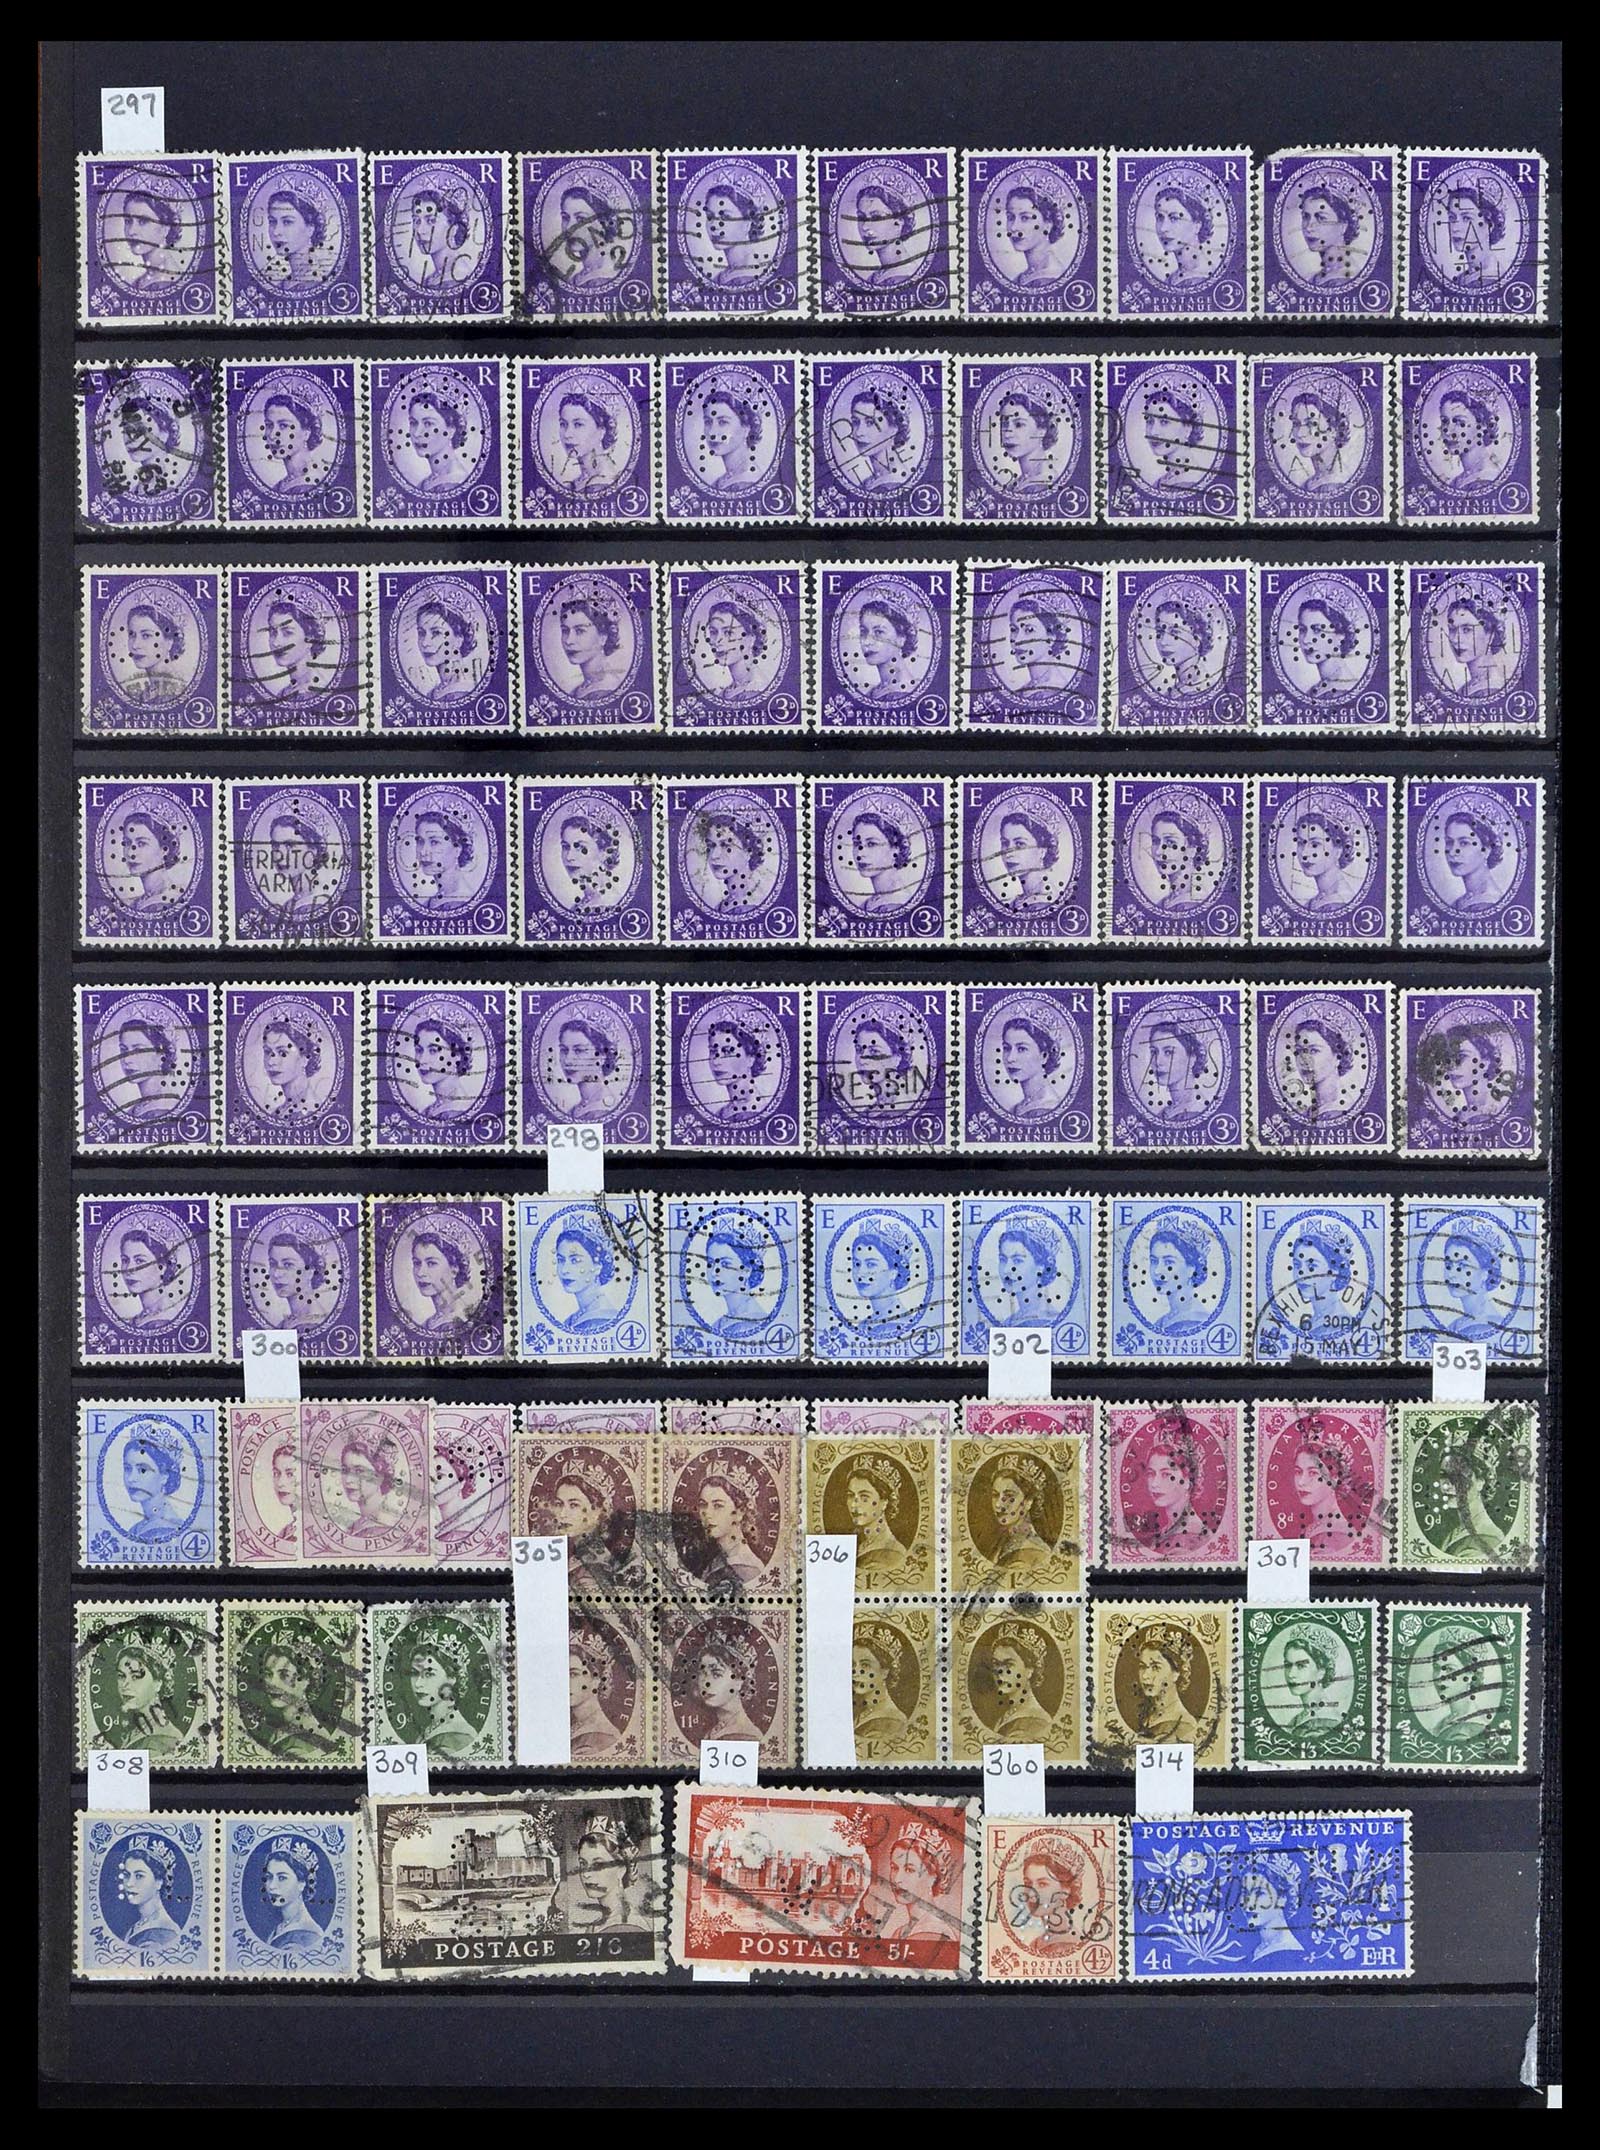 39196 0117 - Stamp collection 39196 Great Britain 1844-1955.